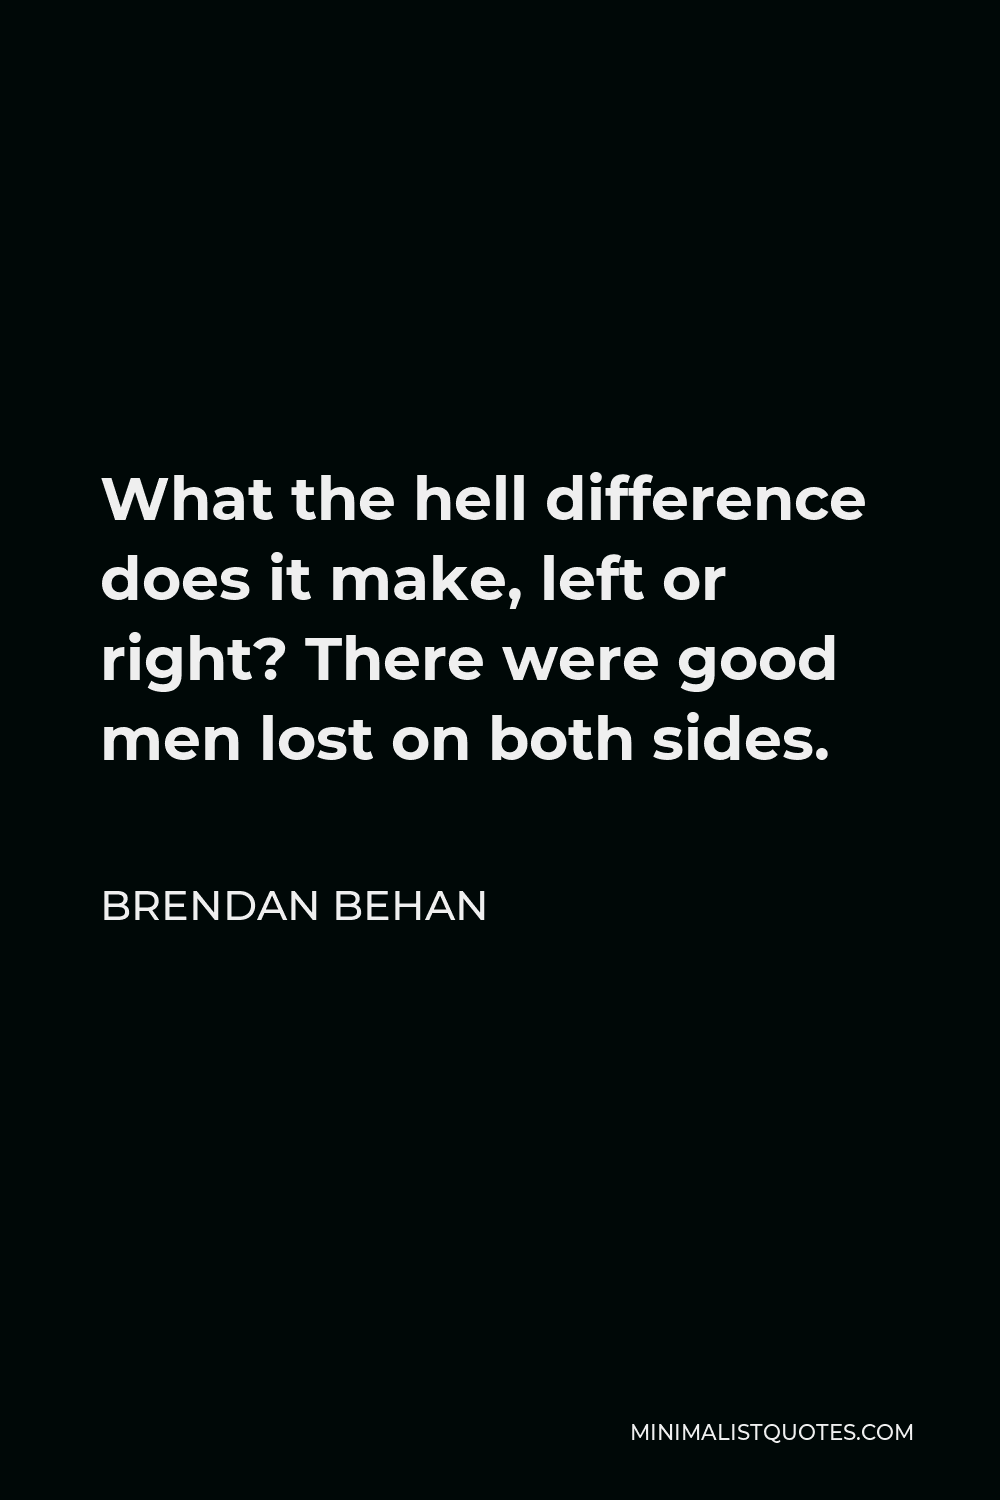 Brendan Behan Quote - What the hell difference does it make, left or right? There were good men lost on both sides.